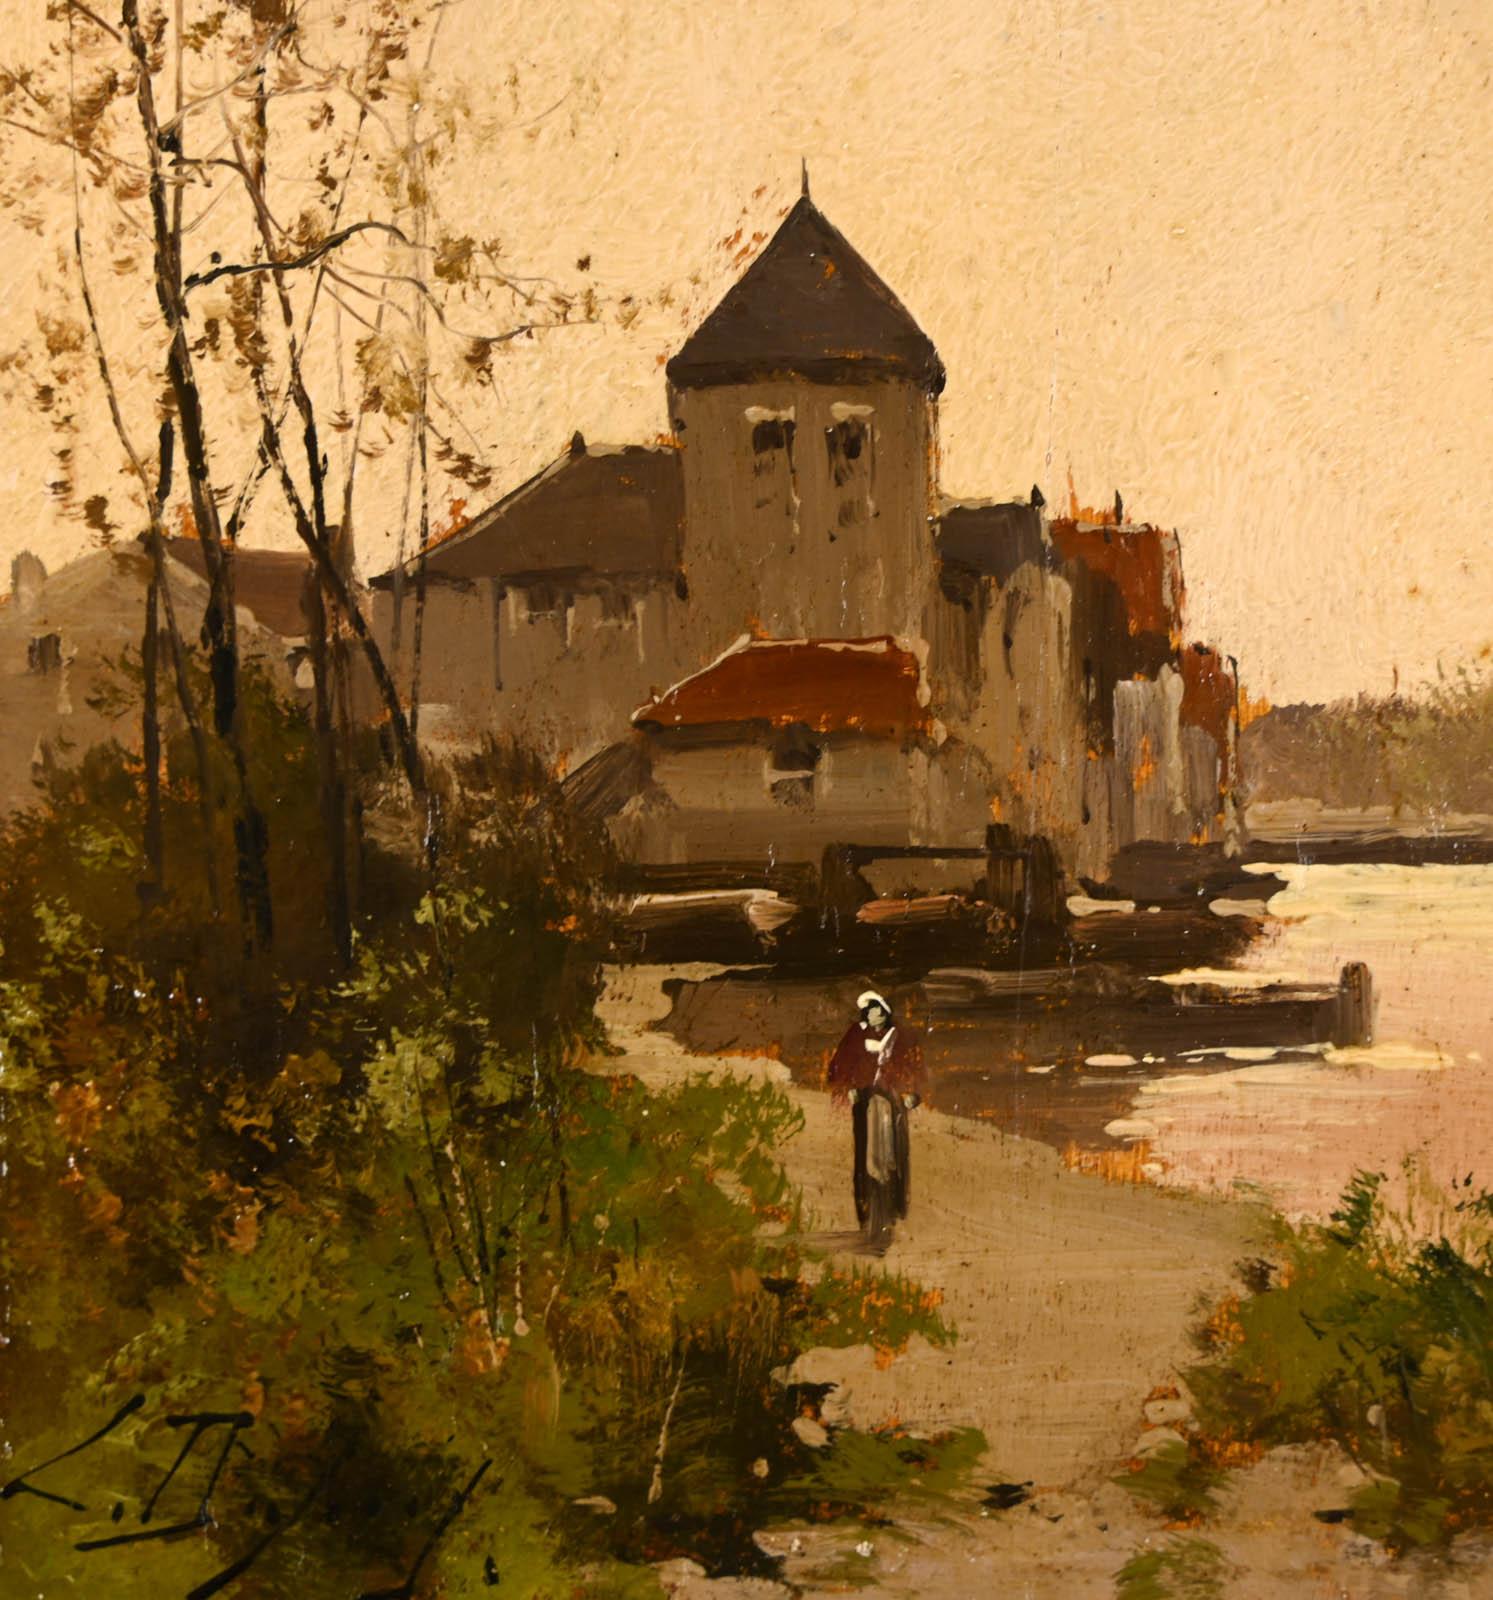 Eugène GALIEN-LALOUE (1854-1941) Pseudonym Louis DUPUY

Village au bord de l'eau

Oil on wood panel
Size: 22 x 16cm
Signed lower left

Provenance : Private collection, Paris

Painting in perfect condition. Recently cleaned and varnished.
Old frame.